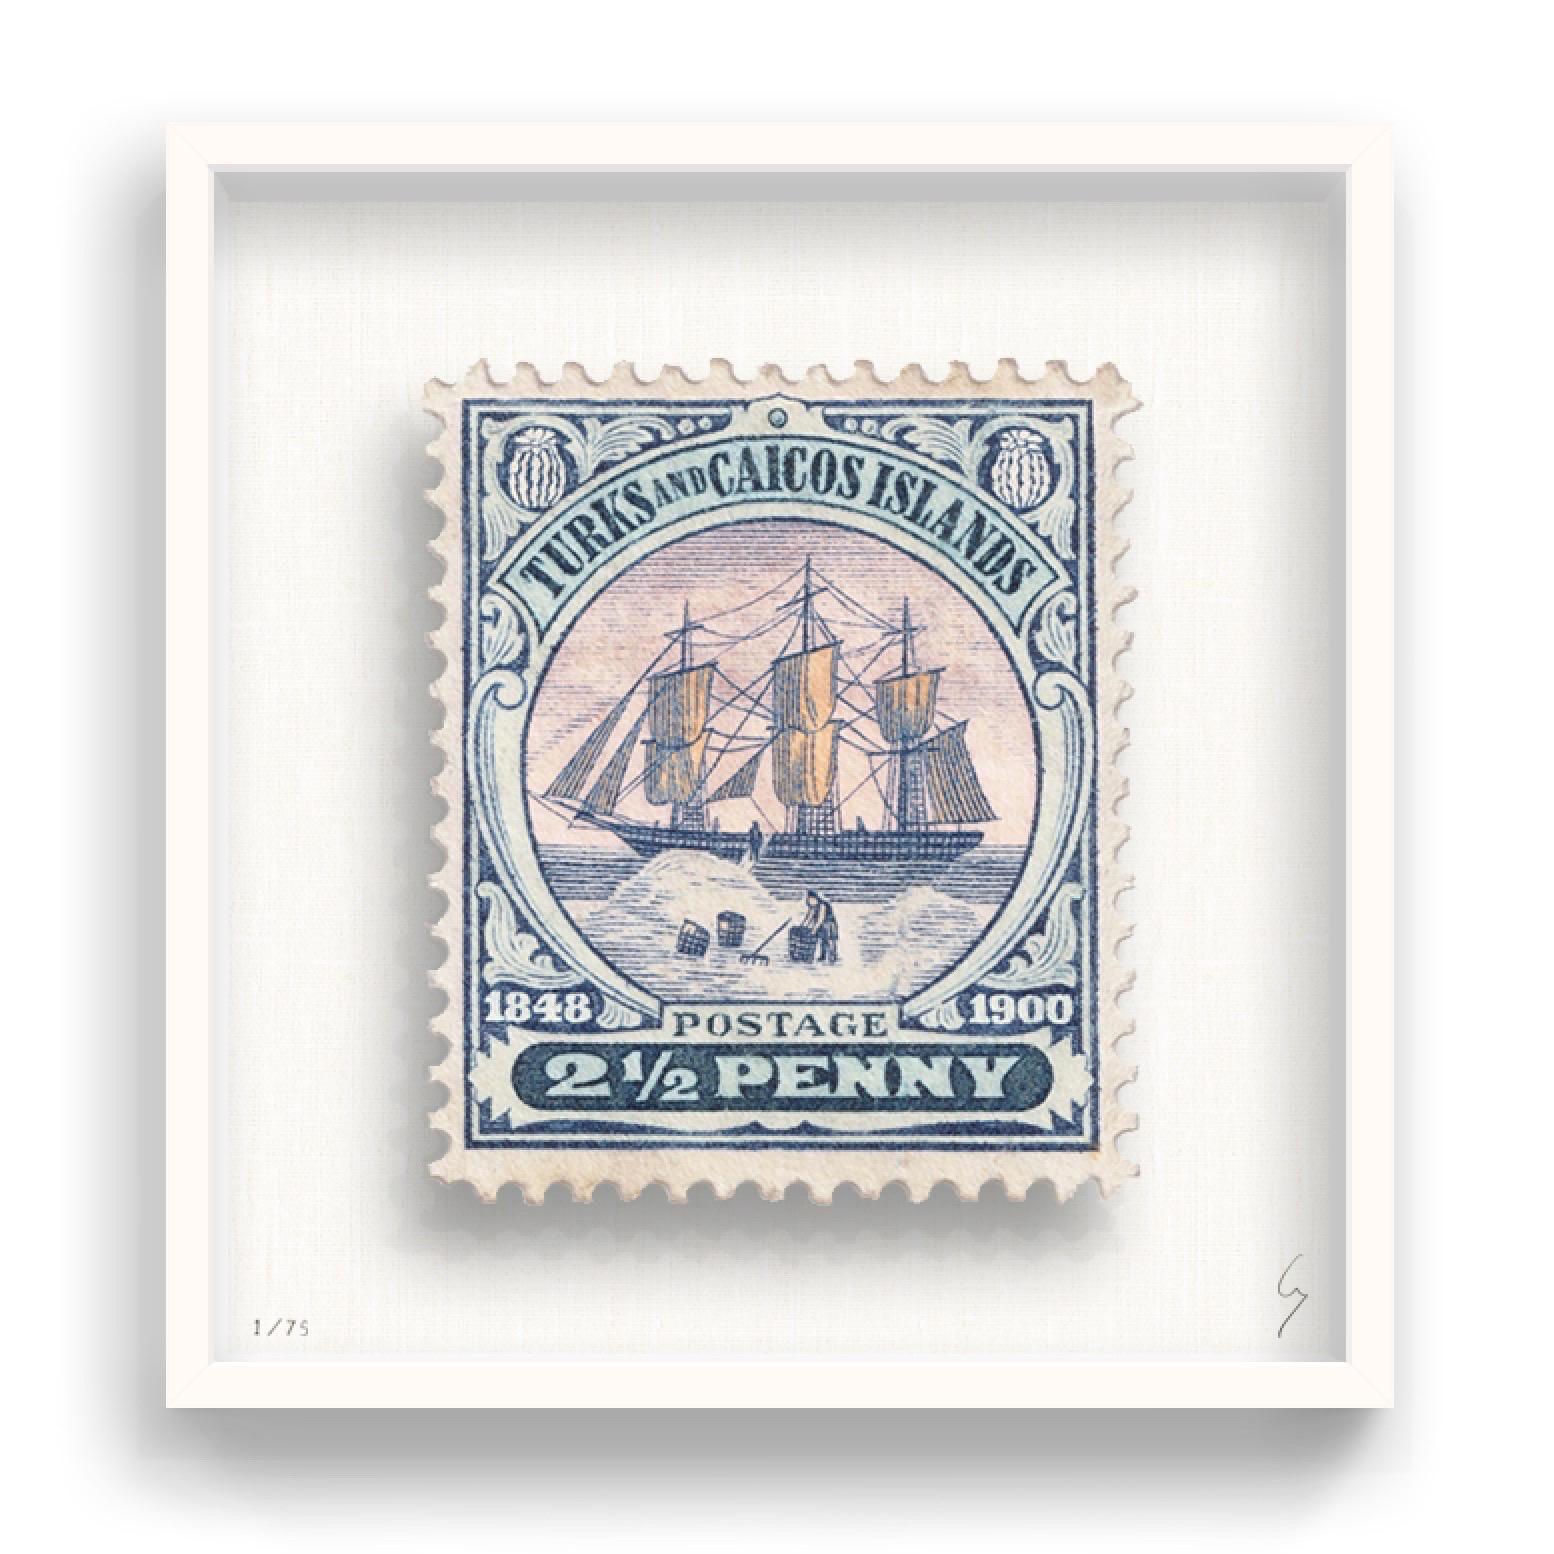 Guy Gee, turks & Caicos (medium)

Hand-engraved print on 350gsm on G.F Smith card
31 x 35 cm (12 1/5 x 13 4/5)
Frame included 
Edition of 75 

Each artwork by Guy had been digitally reimagined from an original postage stamp. Cut out and finished by